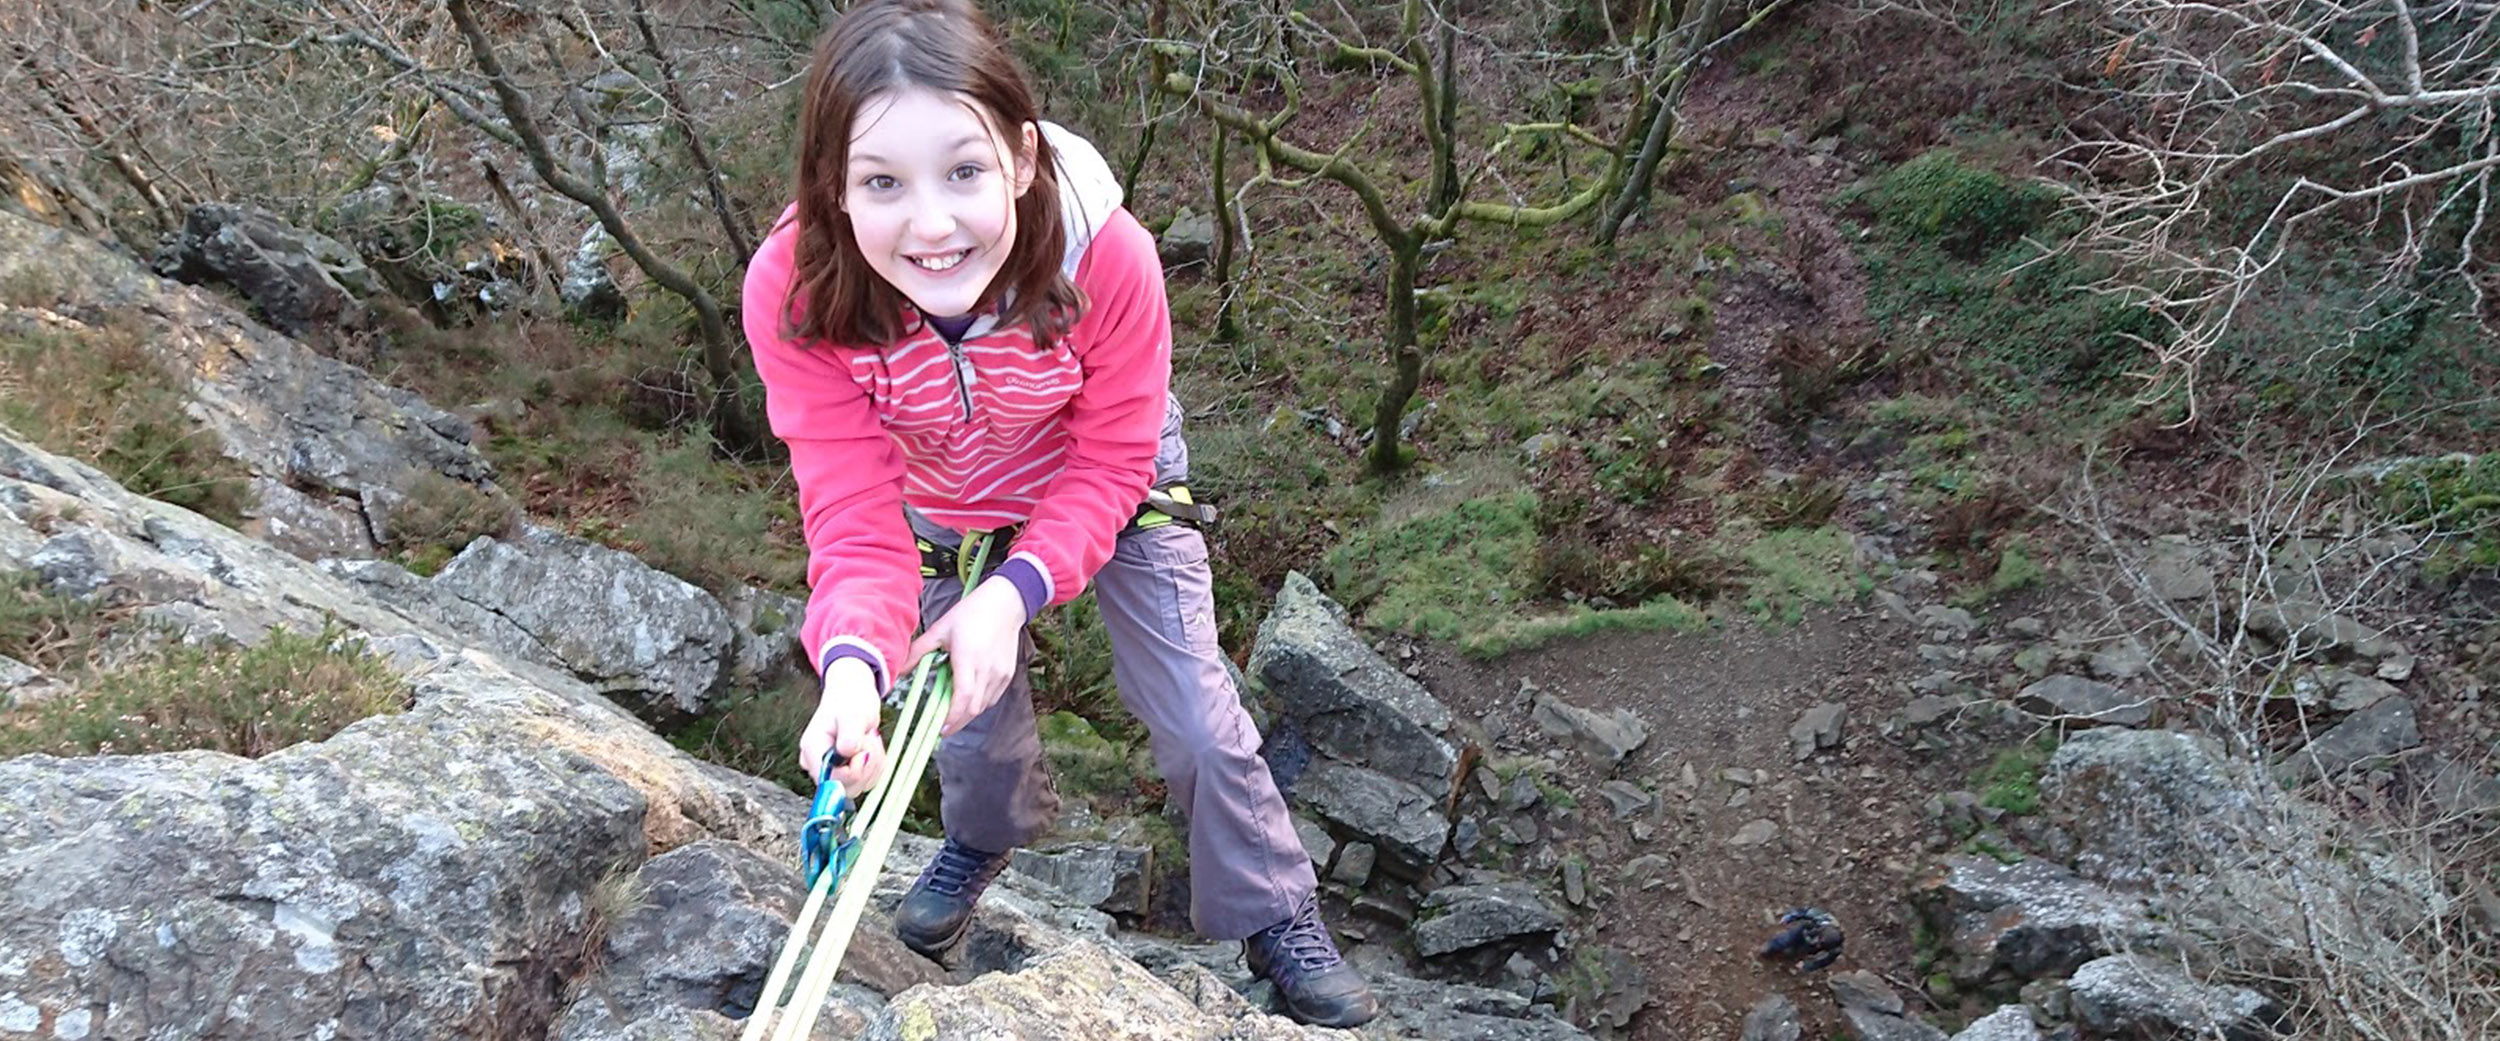 A confident child rock climber, hanging by a rope over the edge of a cliff